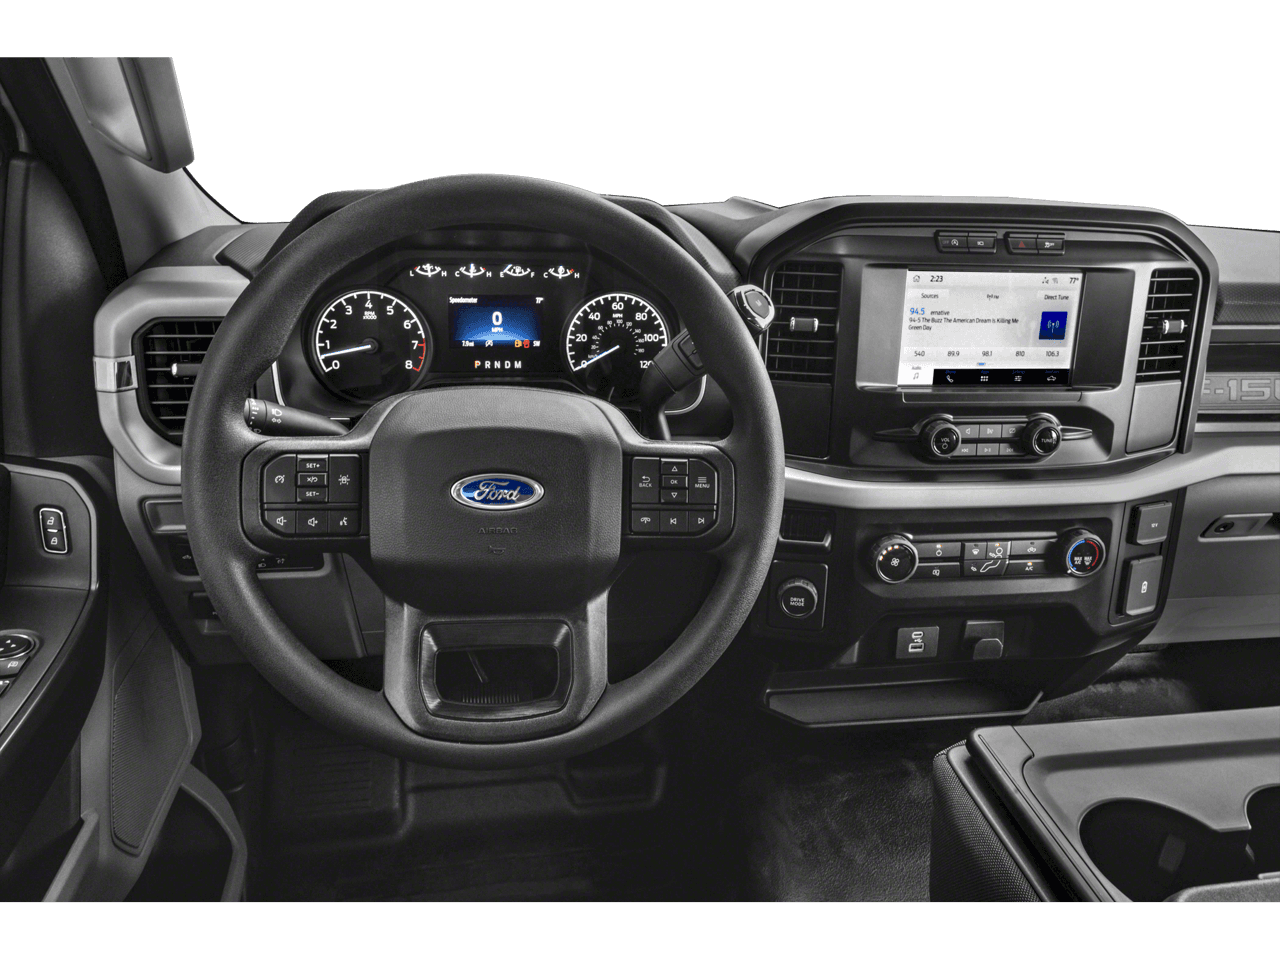 2023 Ford F-150 Photo in Silver Spring, MD 20904